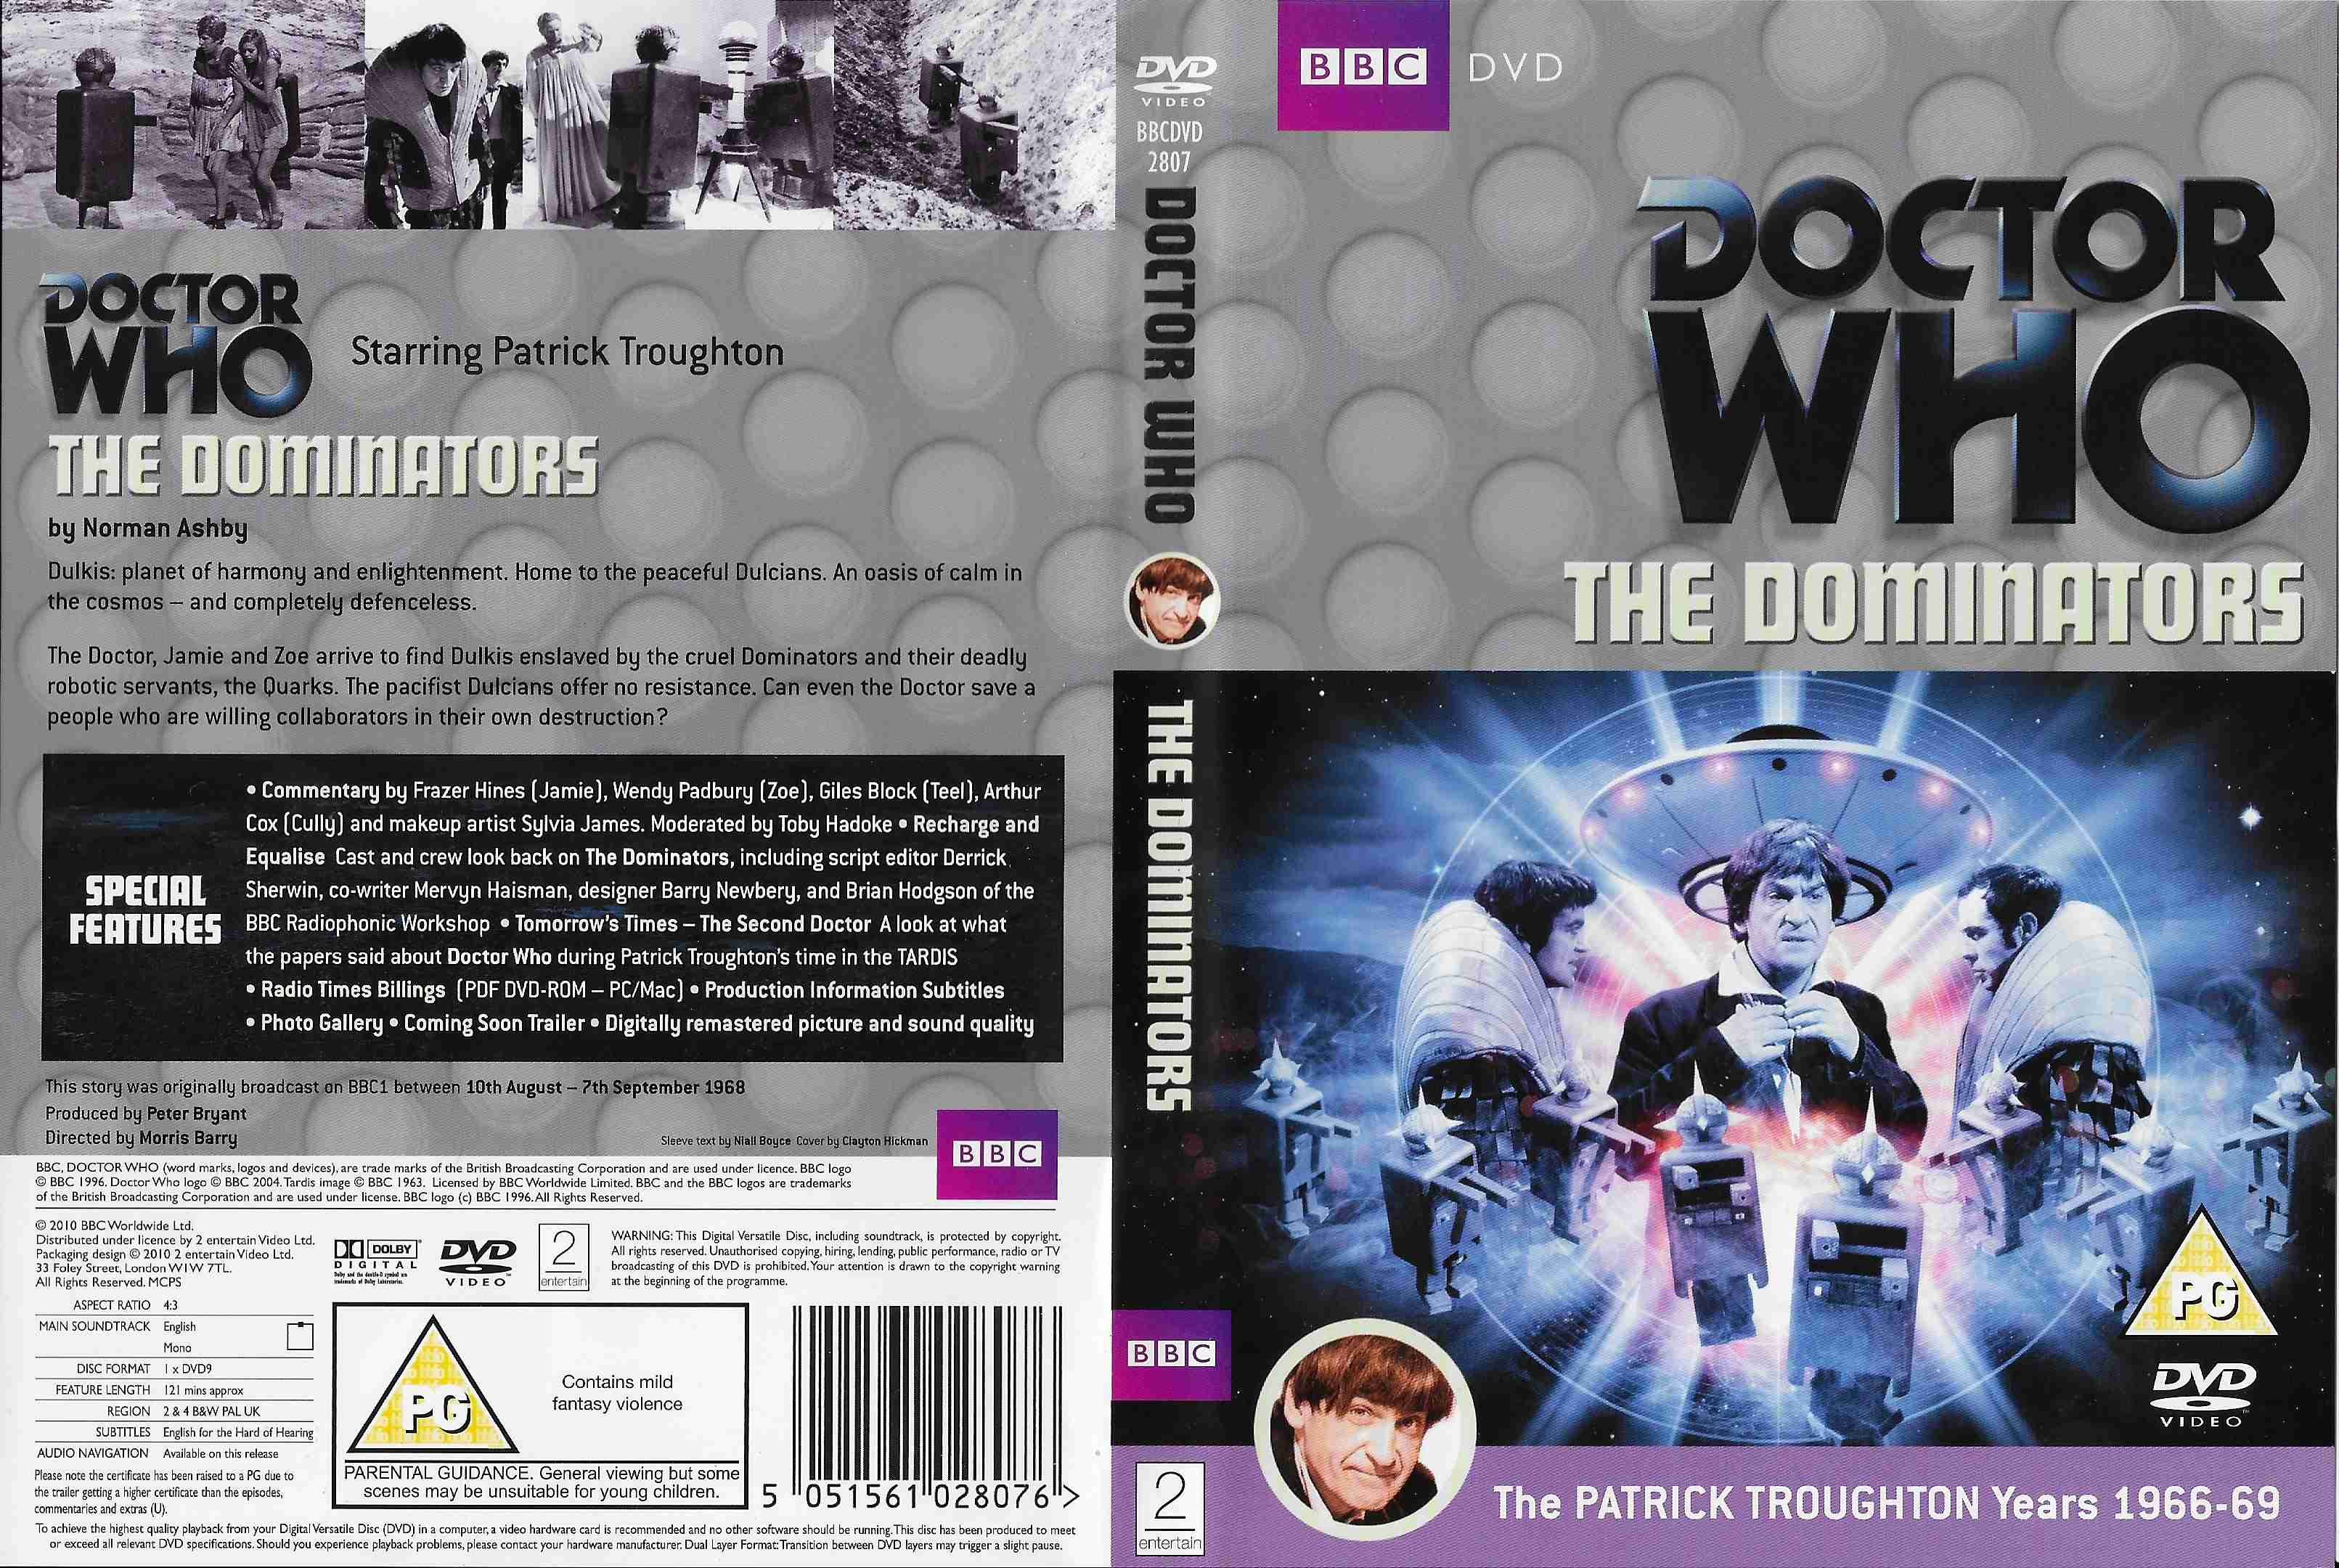 Picture of BBCDVD 2807 Doctor Who - The Dominators by artist Norman Ashby from the BBC records and Tapes library